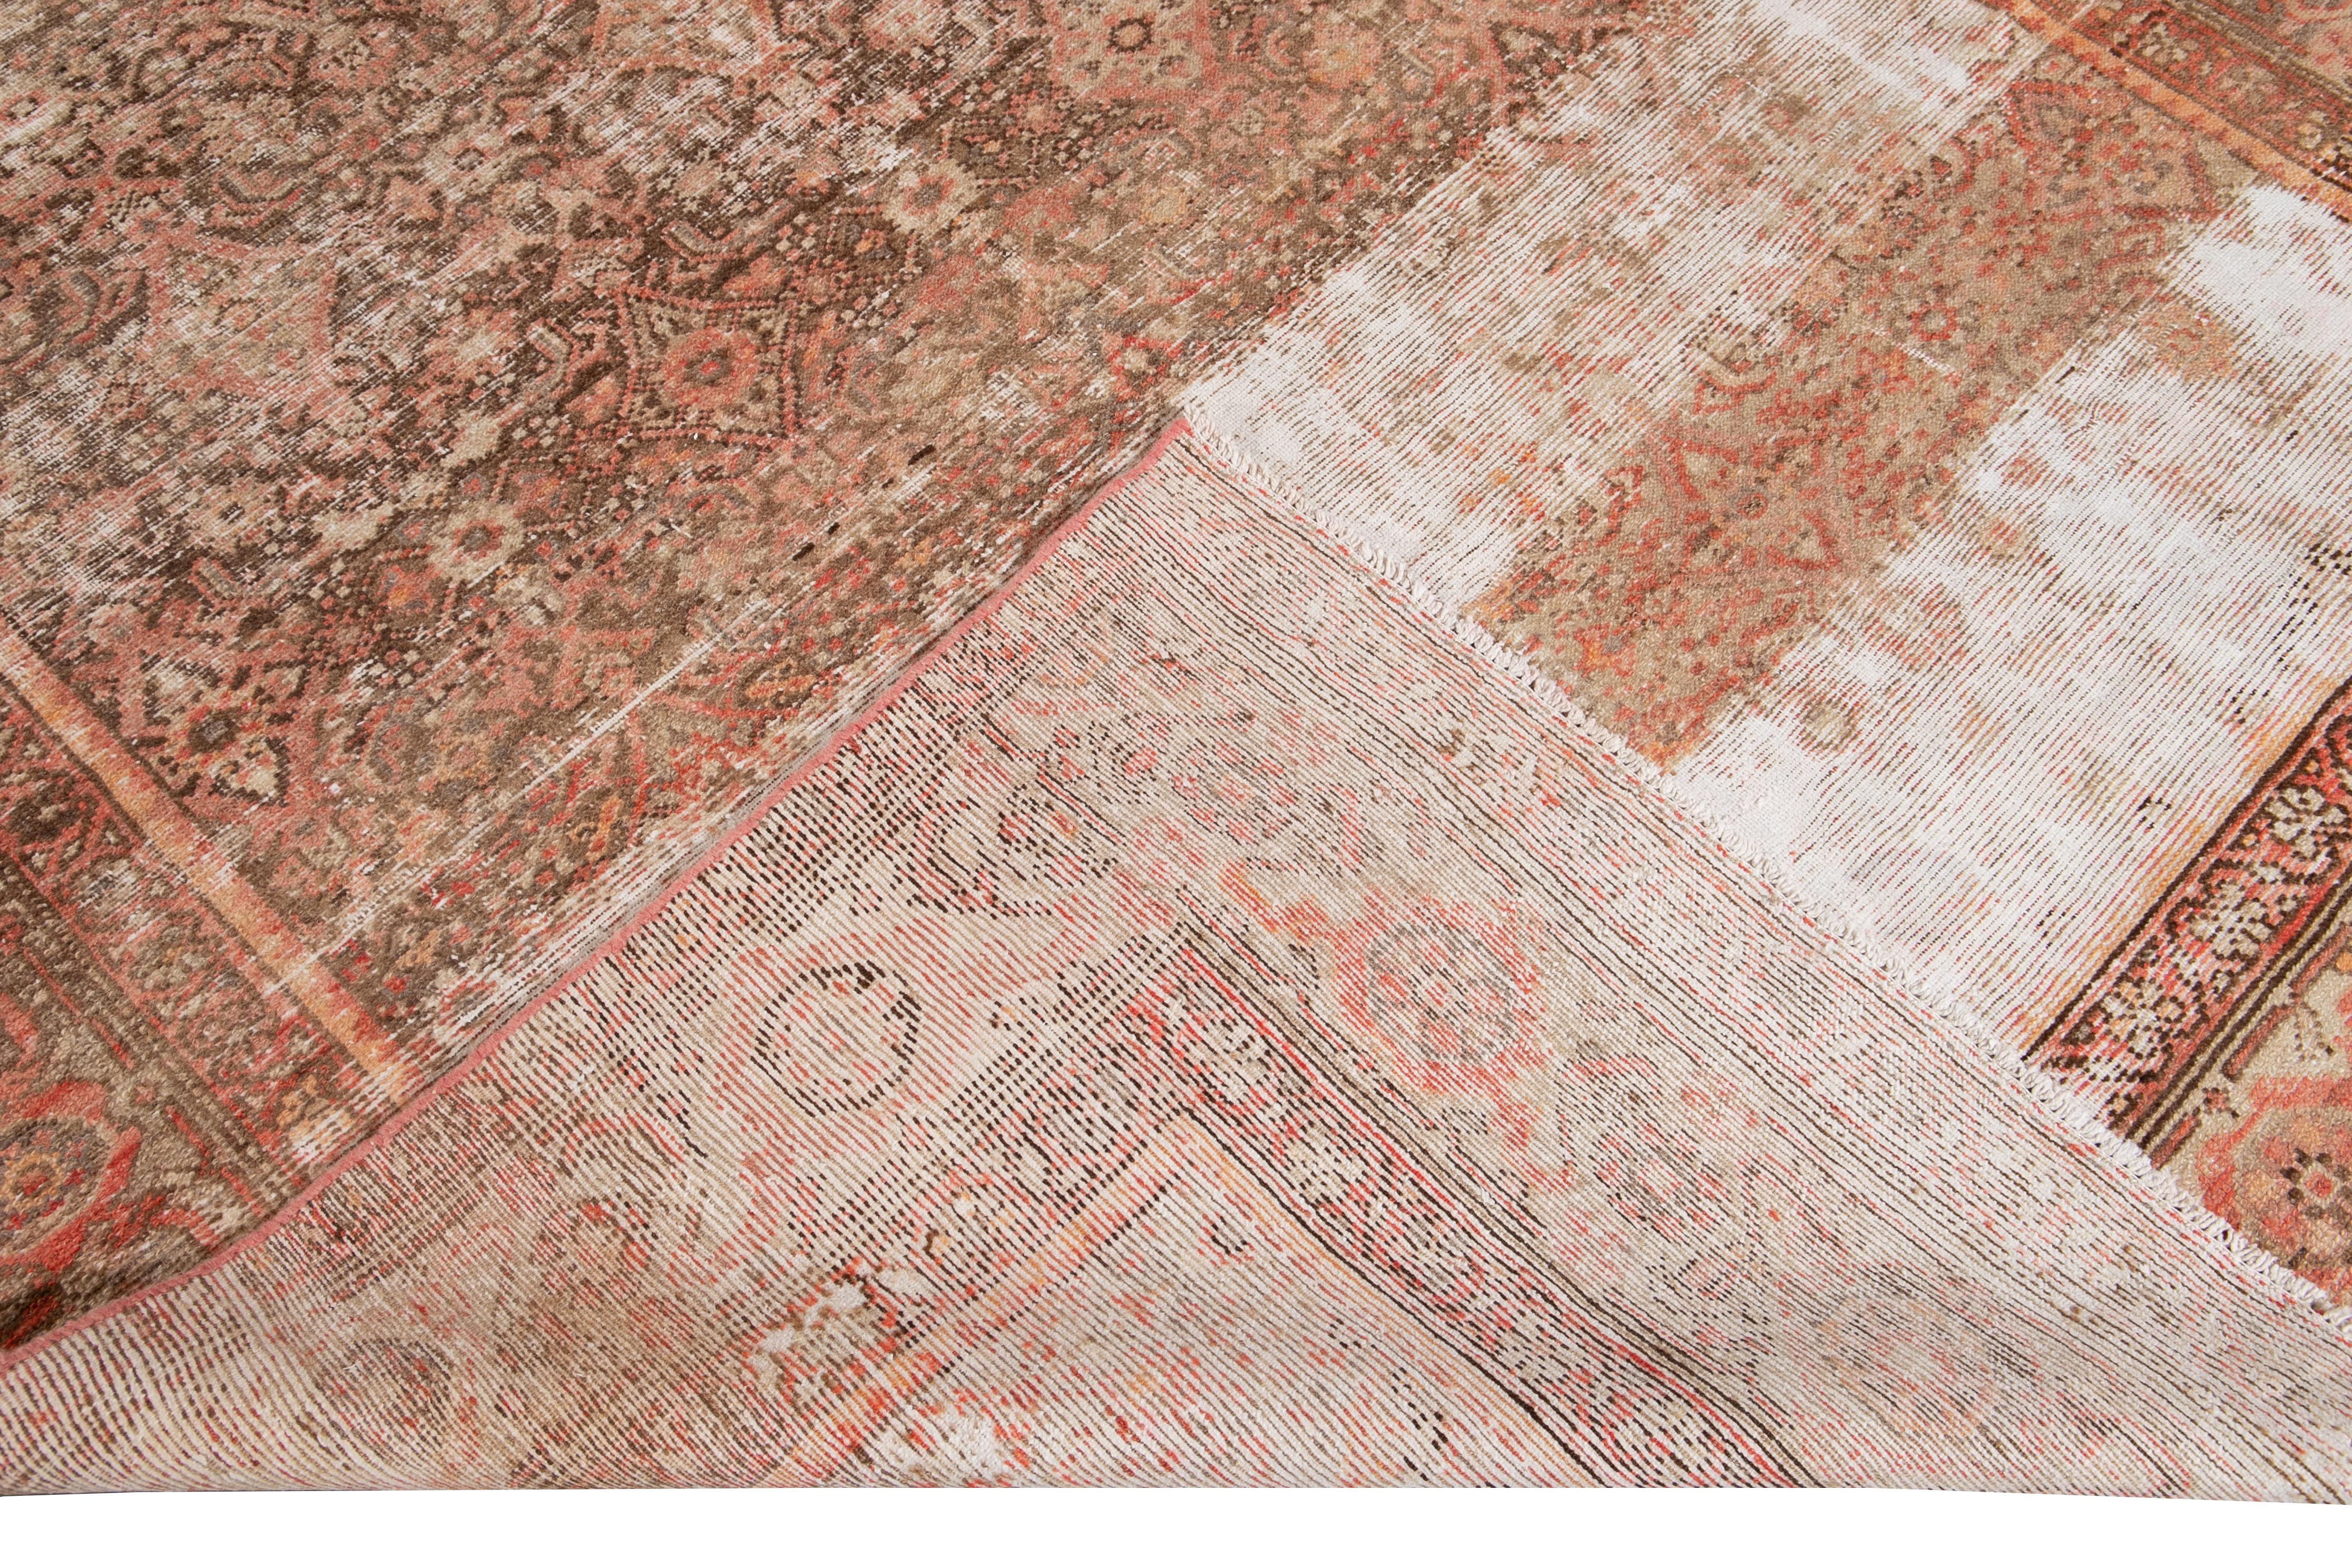 Beautiful antique Malayer hand knotted wool runner with an orange and peach field. This Malayer rug has accents of ivory and brown in an all-over gorgeous geometric floral distressed design.

This rug measures: 6'5